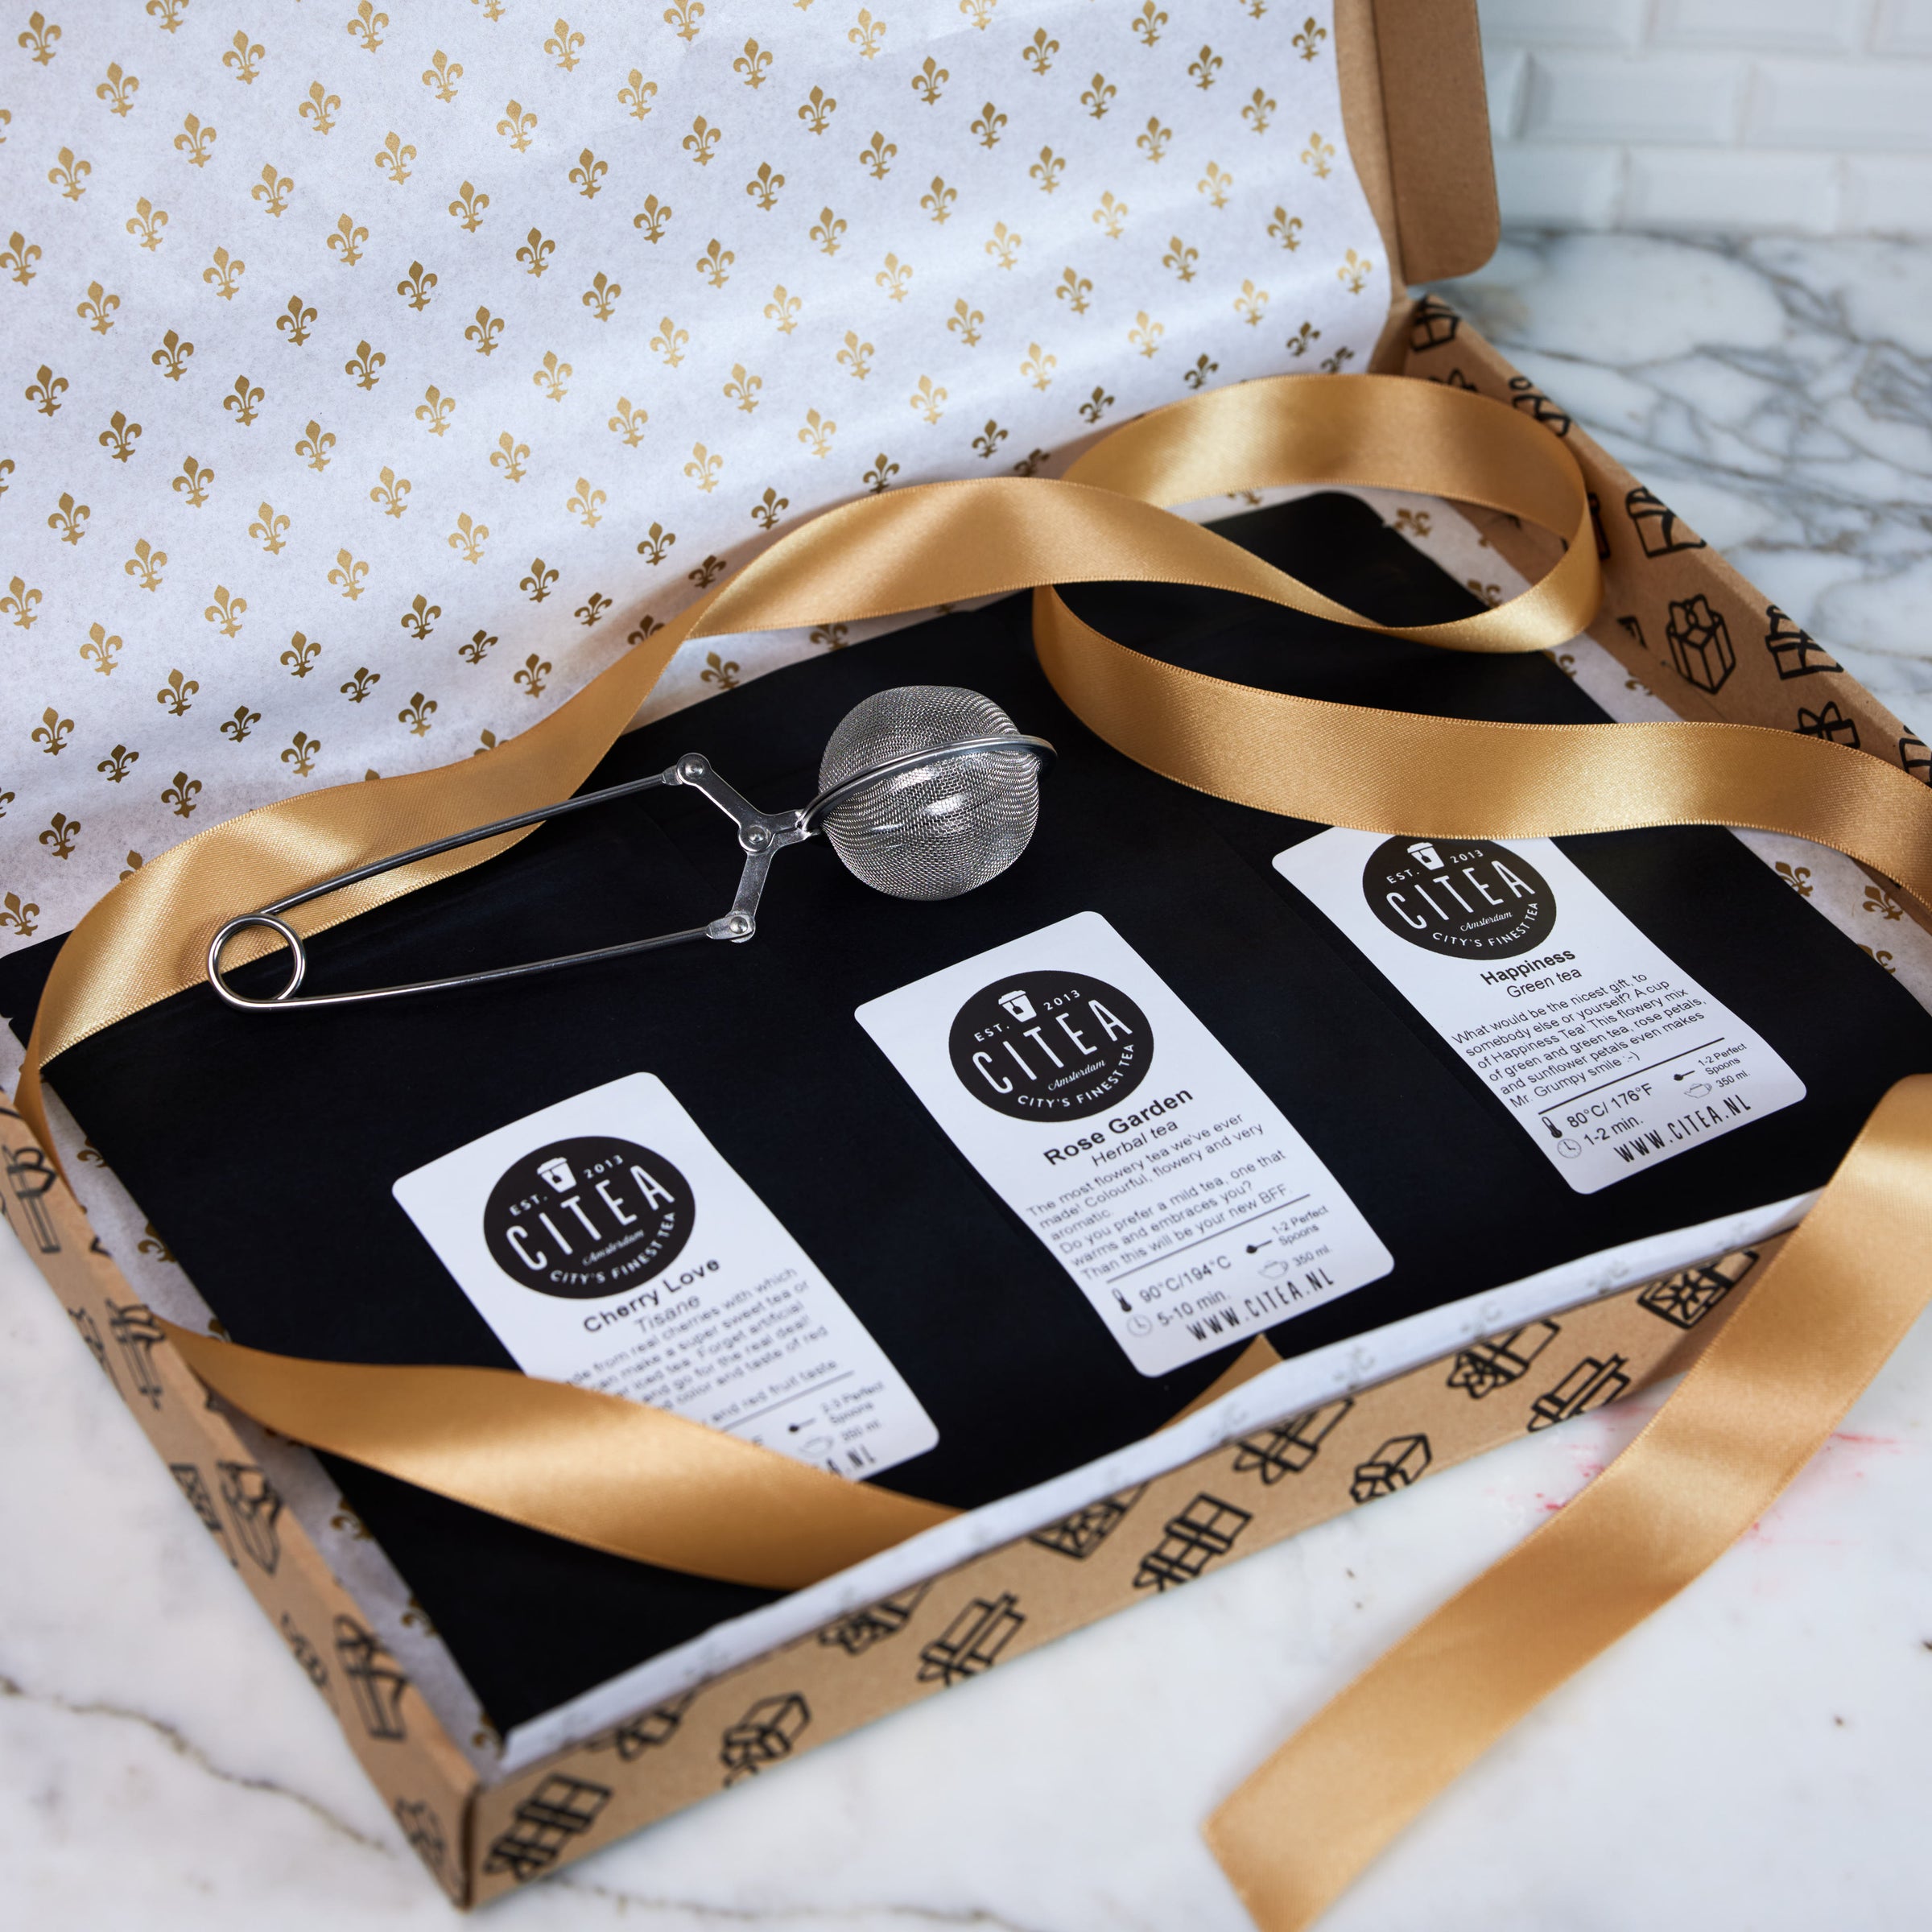 CiTea thee, gift box with tea filter